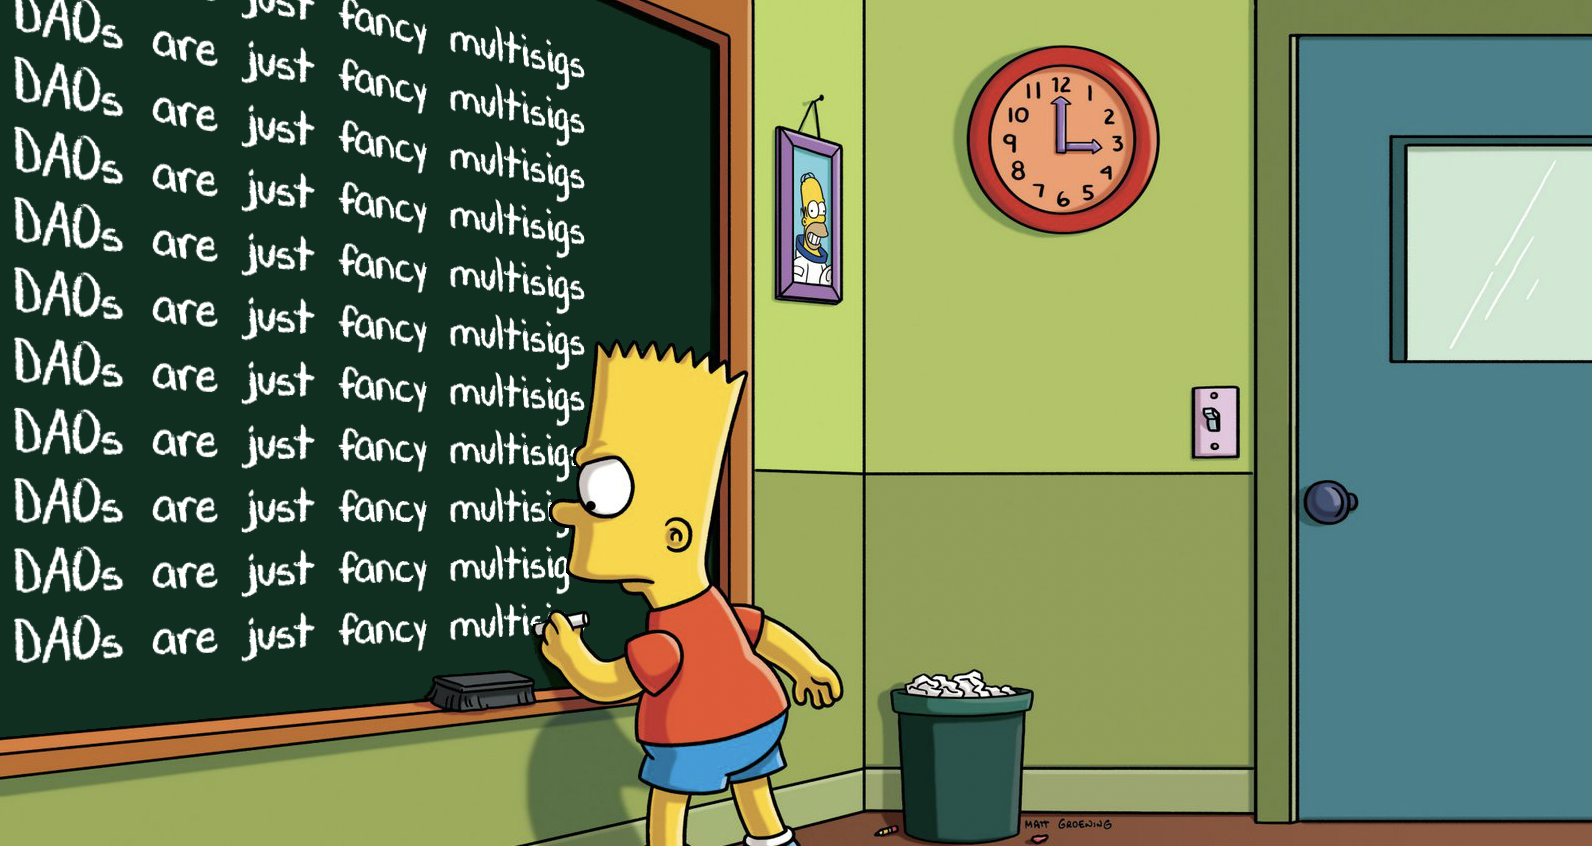 Bart Simpson writing &ldquo;DAOs are just fancy multisigs&rdquo;.